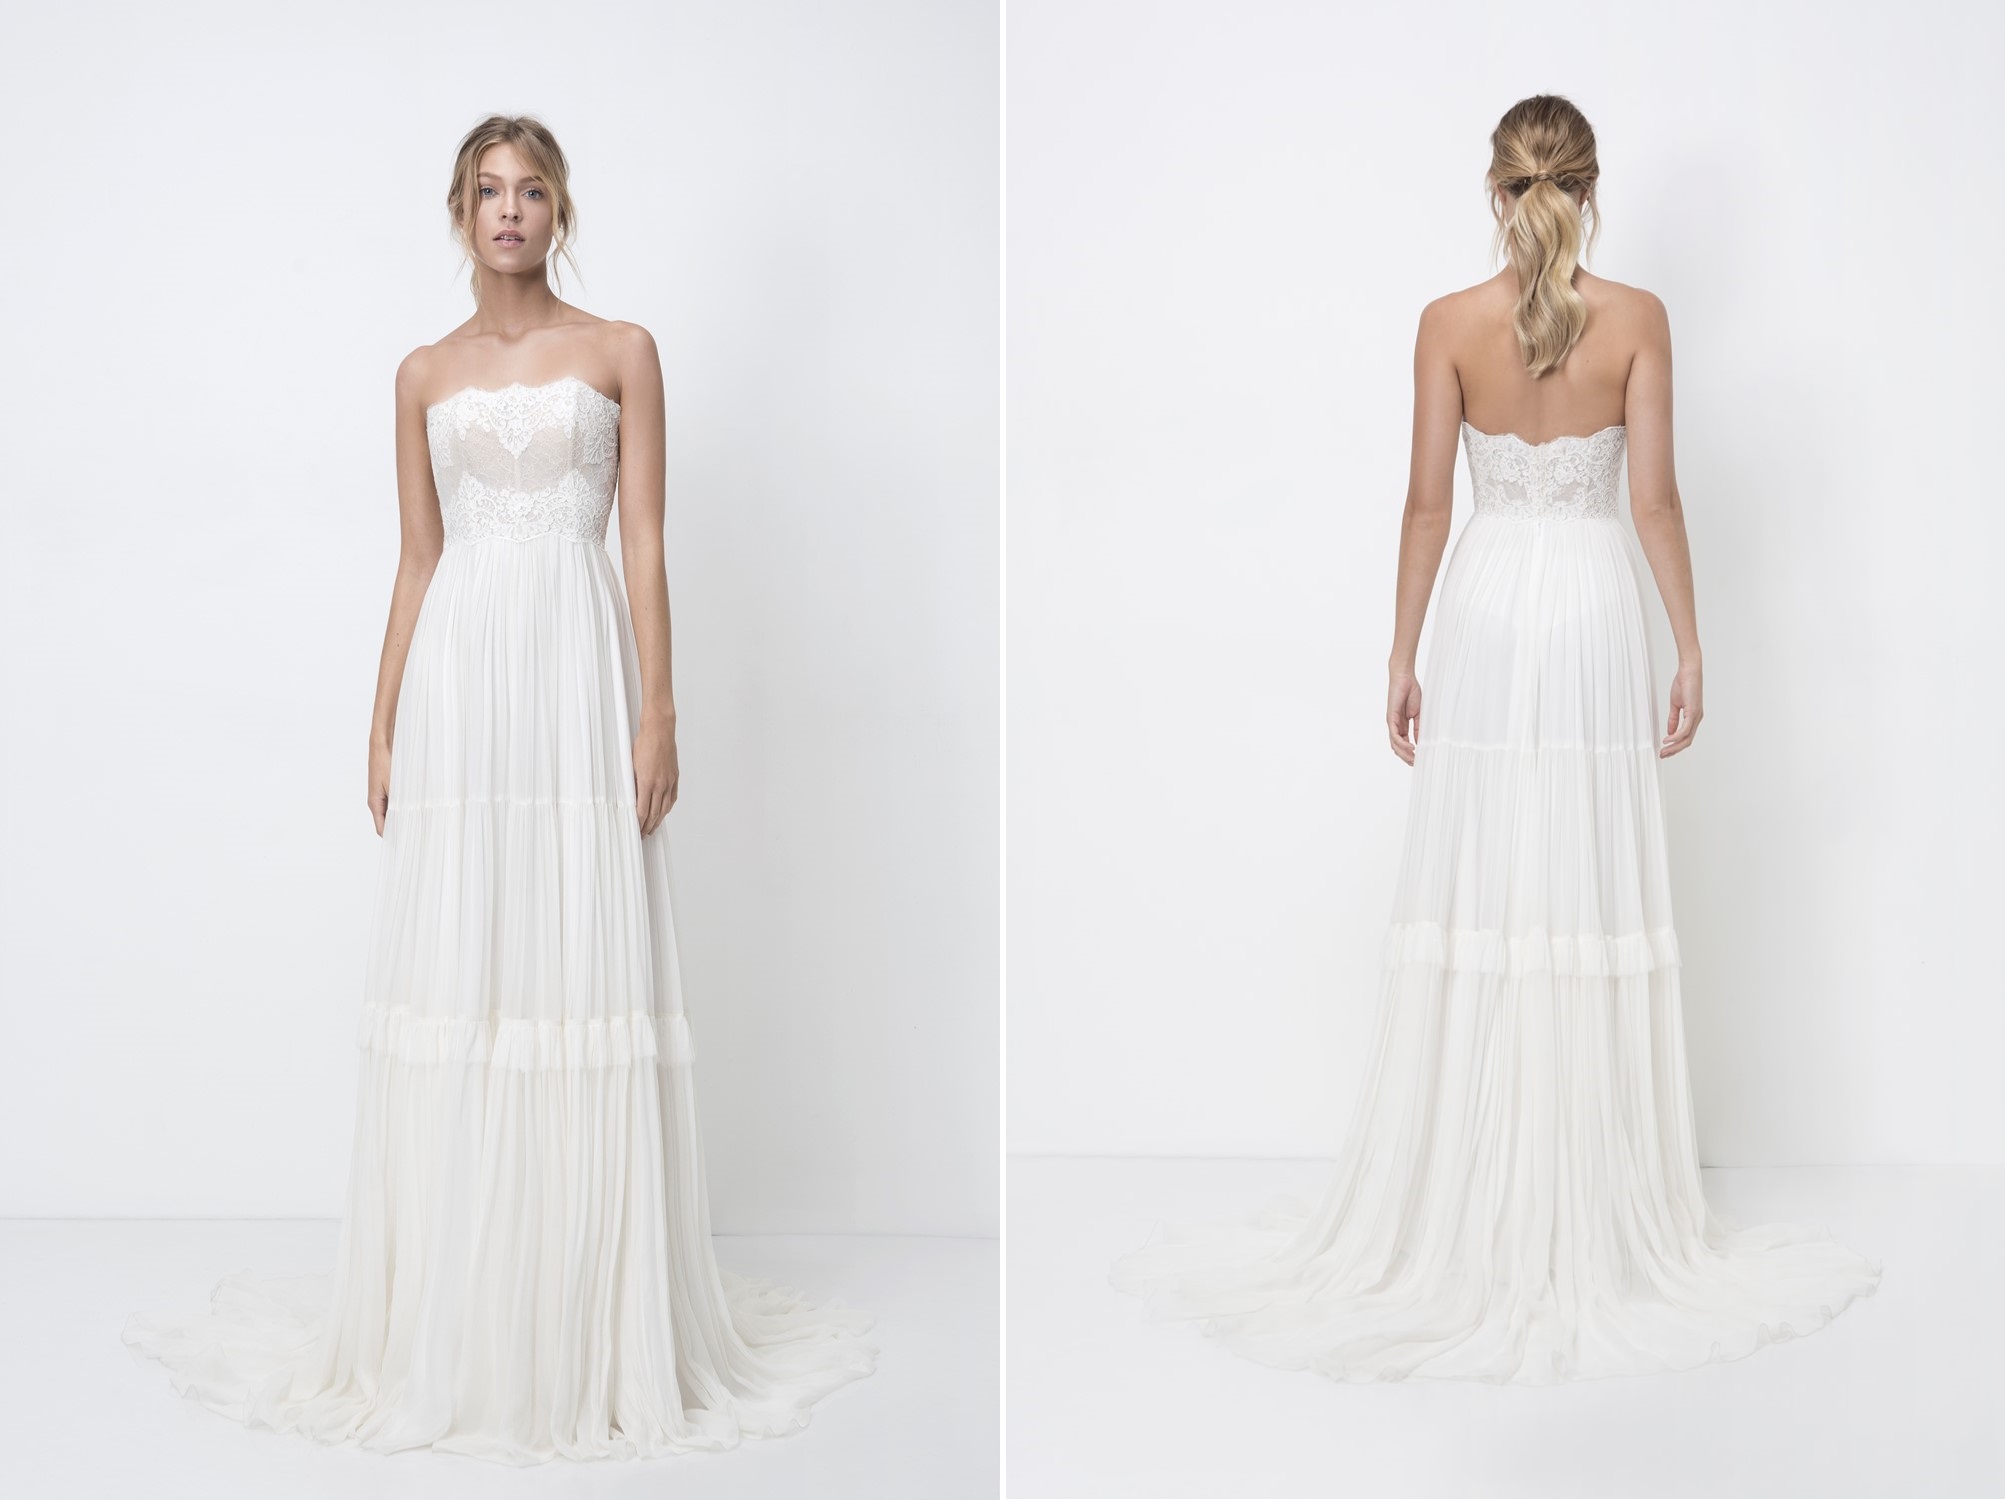 Blanche Wedding Dress from Lihi Hod's 2018 Bridal Collection